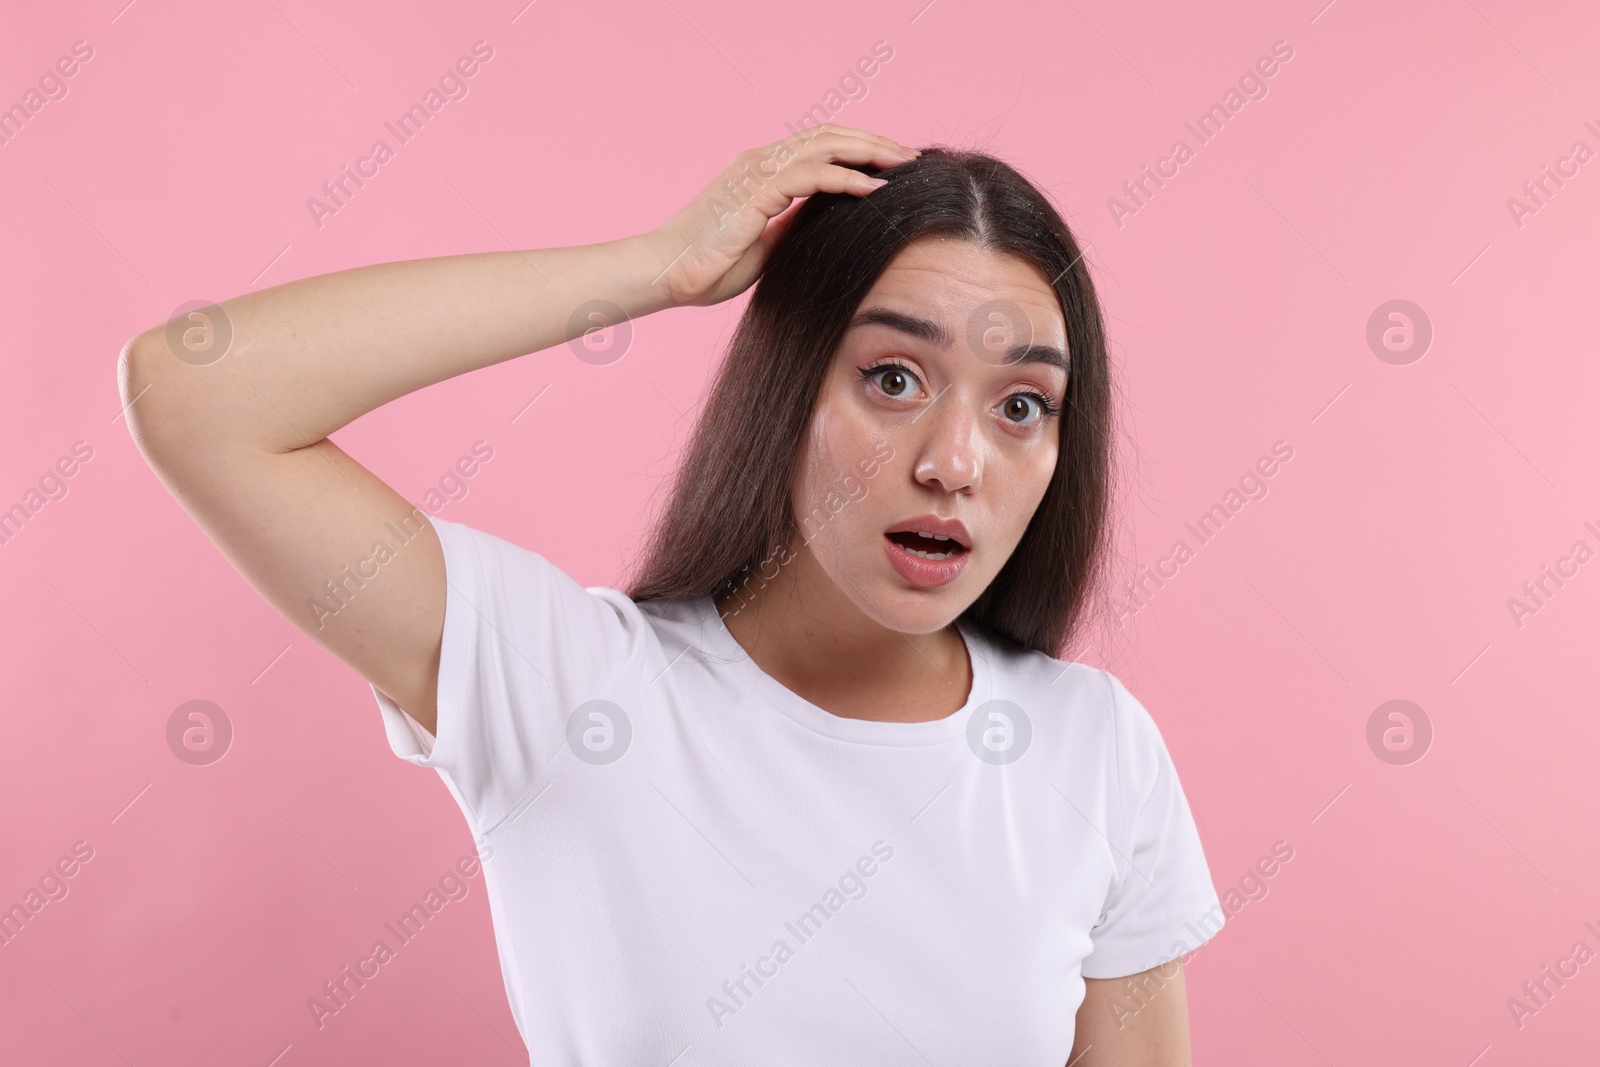 Photo of Emotional woman suffering from dandruff problem on pink background